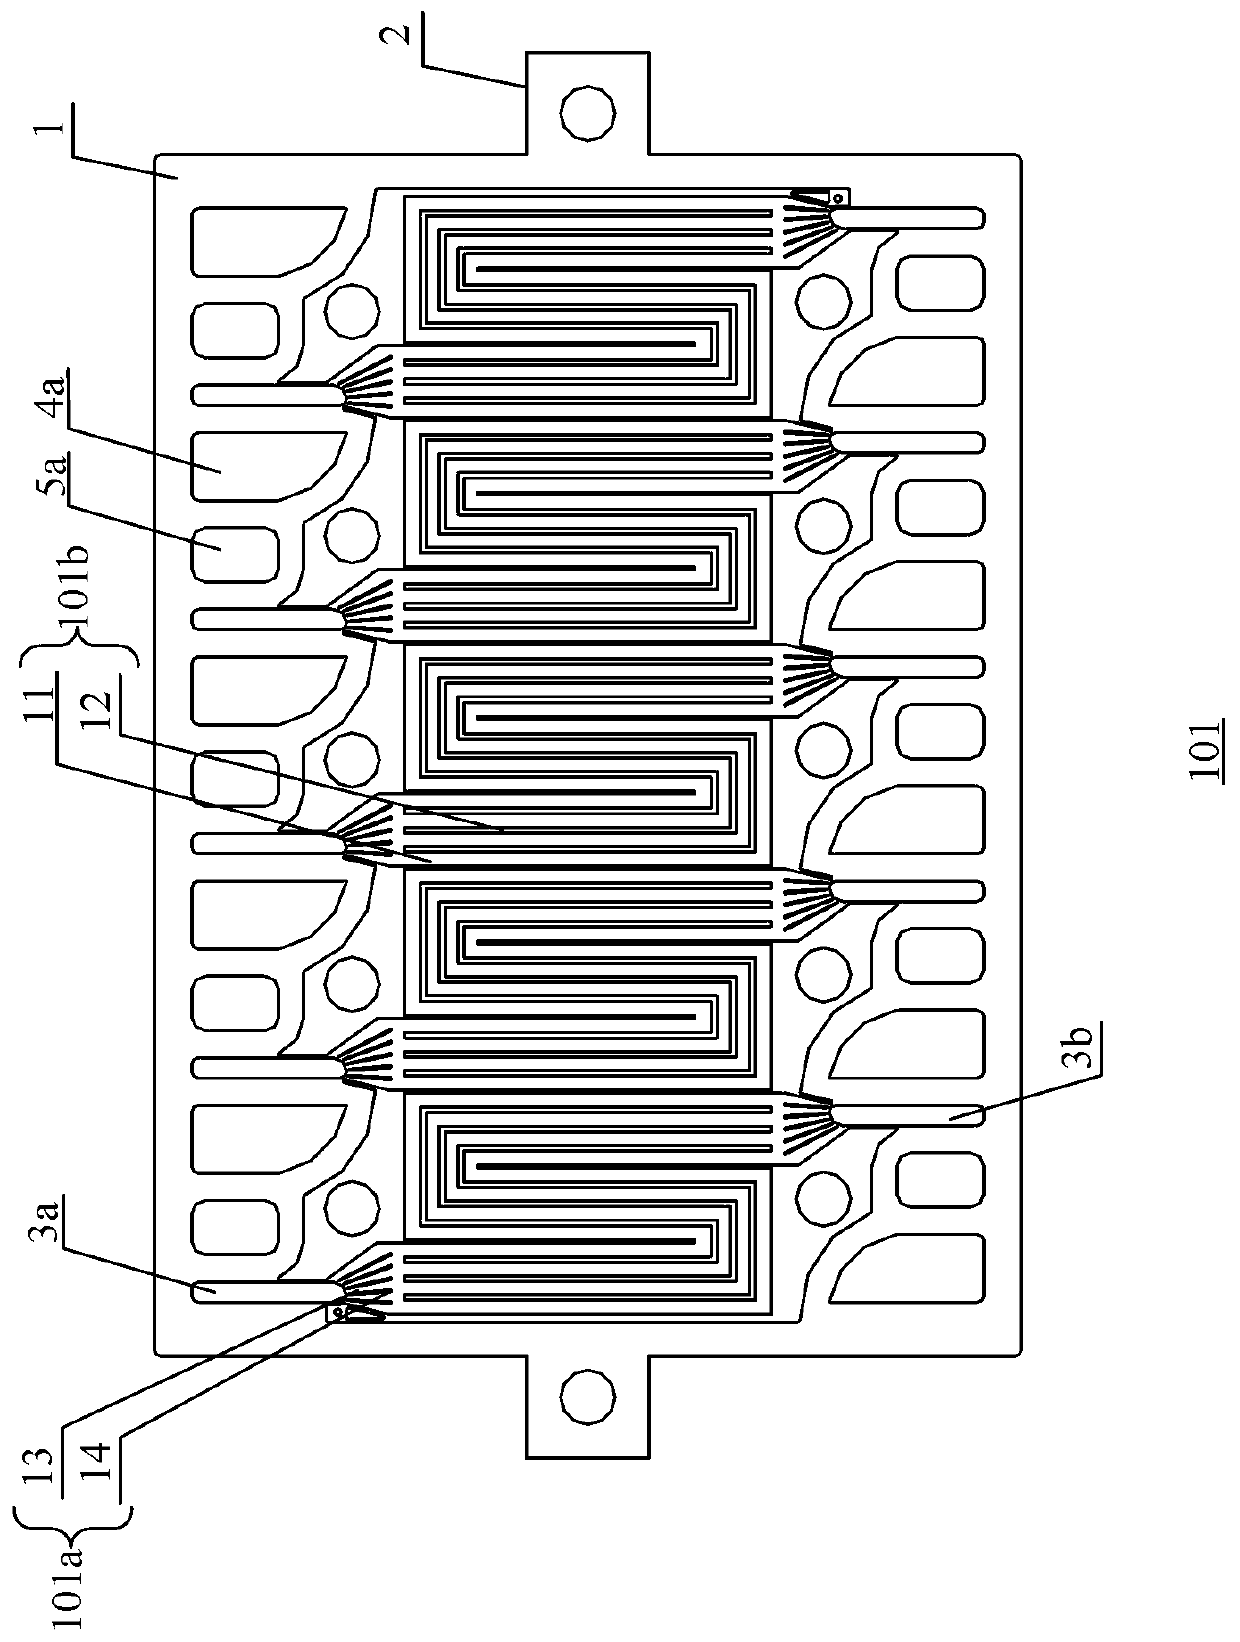 Fuel cells, and bipolar plates and bipolar plate assemblies for fuel cells